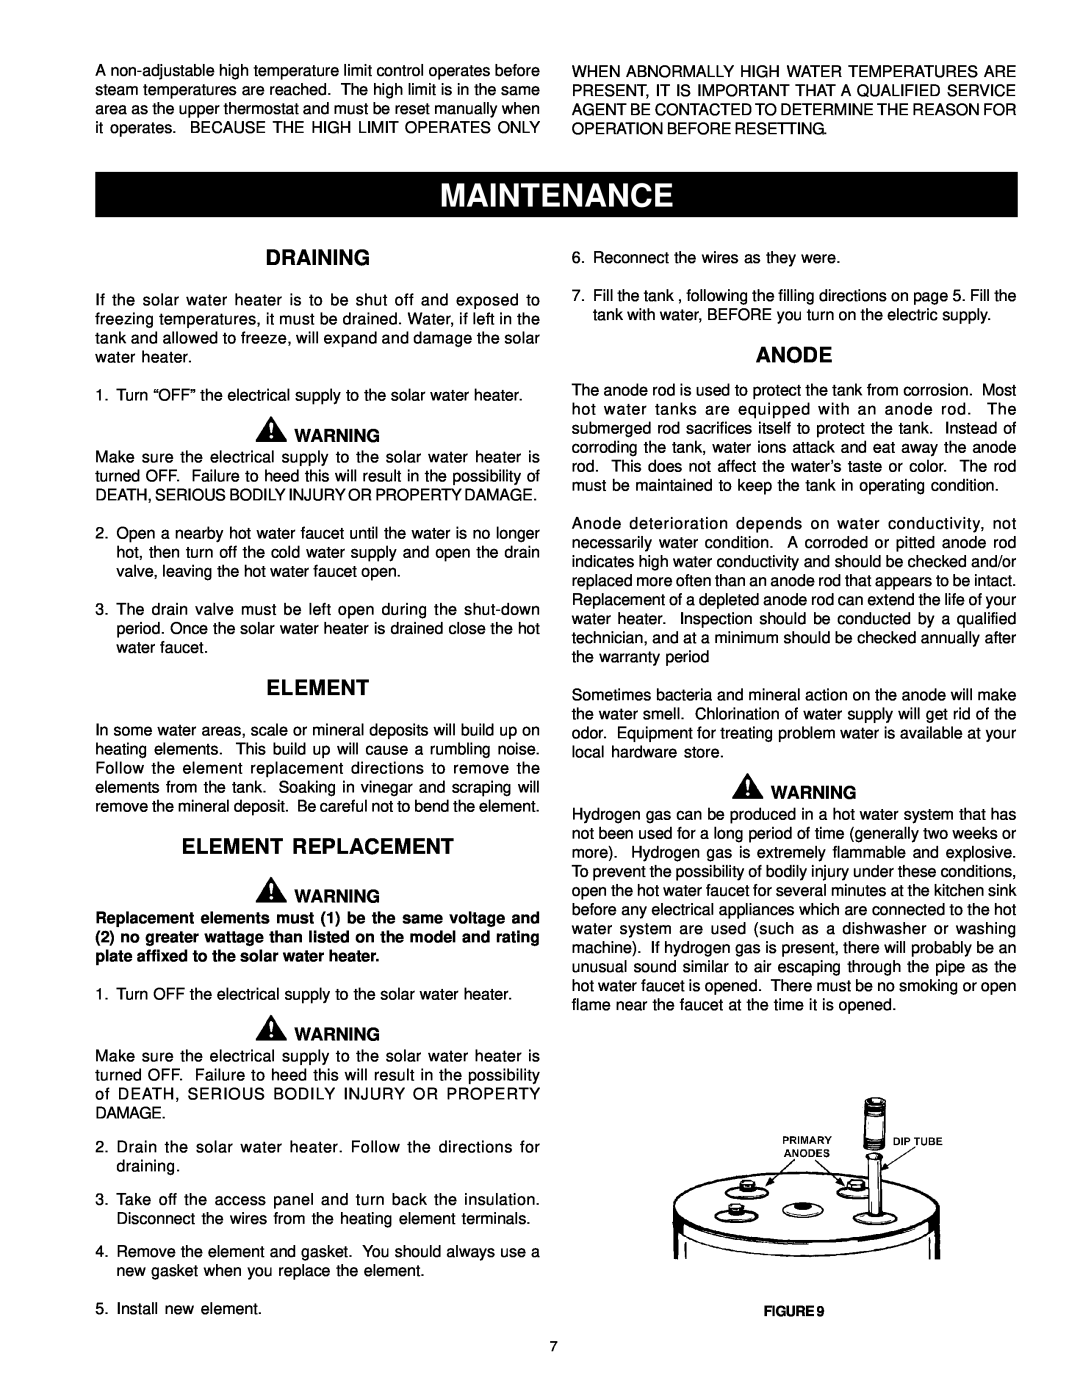 American Water Heater 317365-002 instruction manual Maintenance, Draining, Element Replacement, Anode 